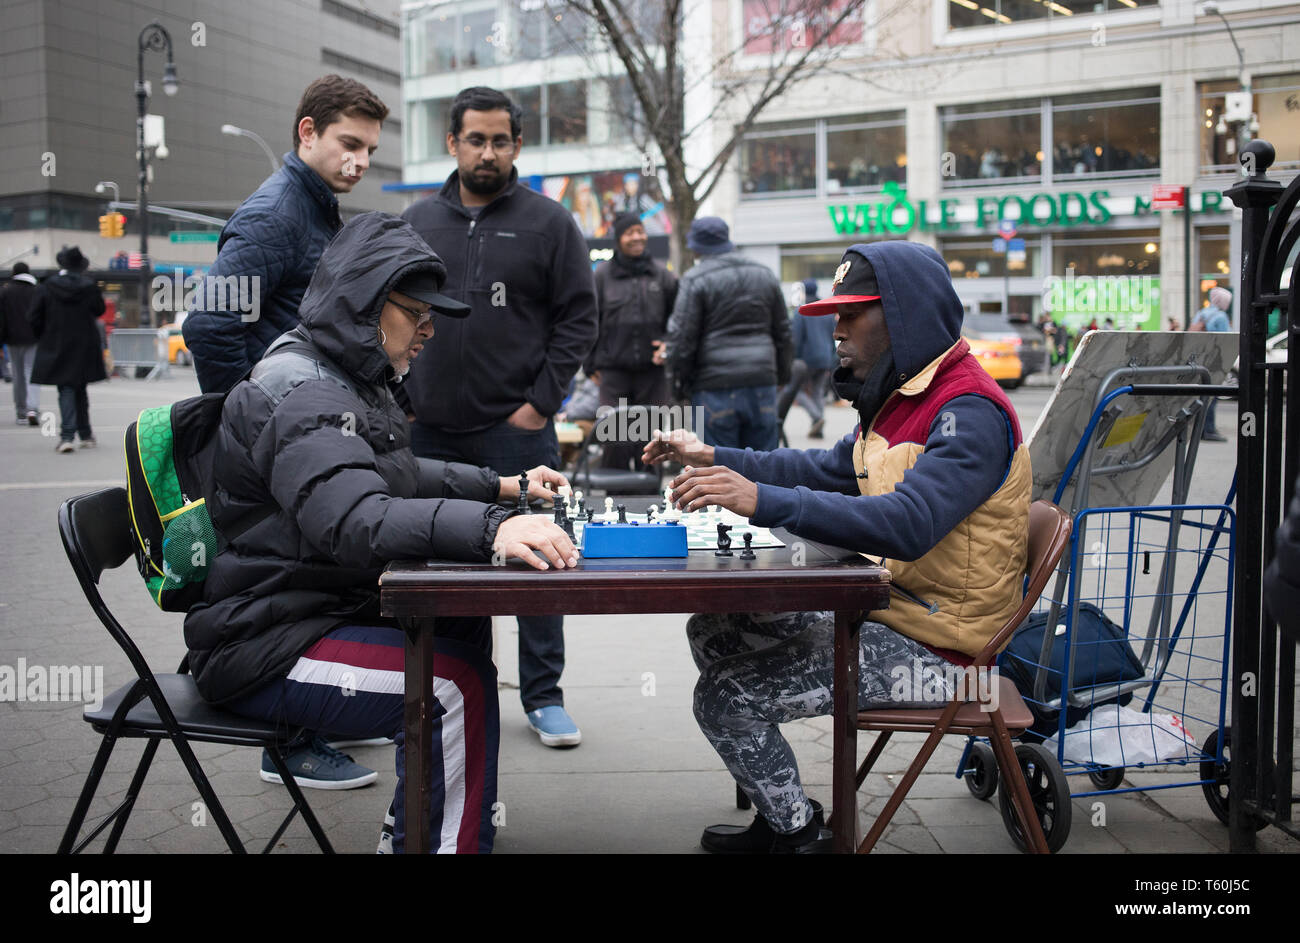 Union Square Park, NY - March 07, 2017: Unidentified afro American people playing chess in the Union Square Park in Manhattan, NY Stock Photo